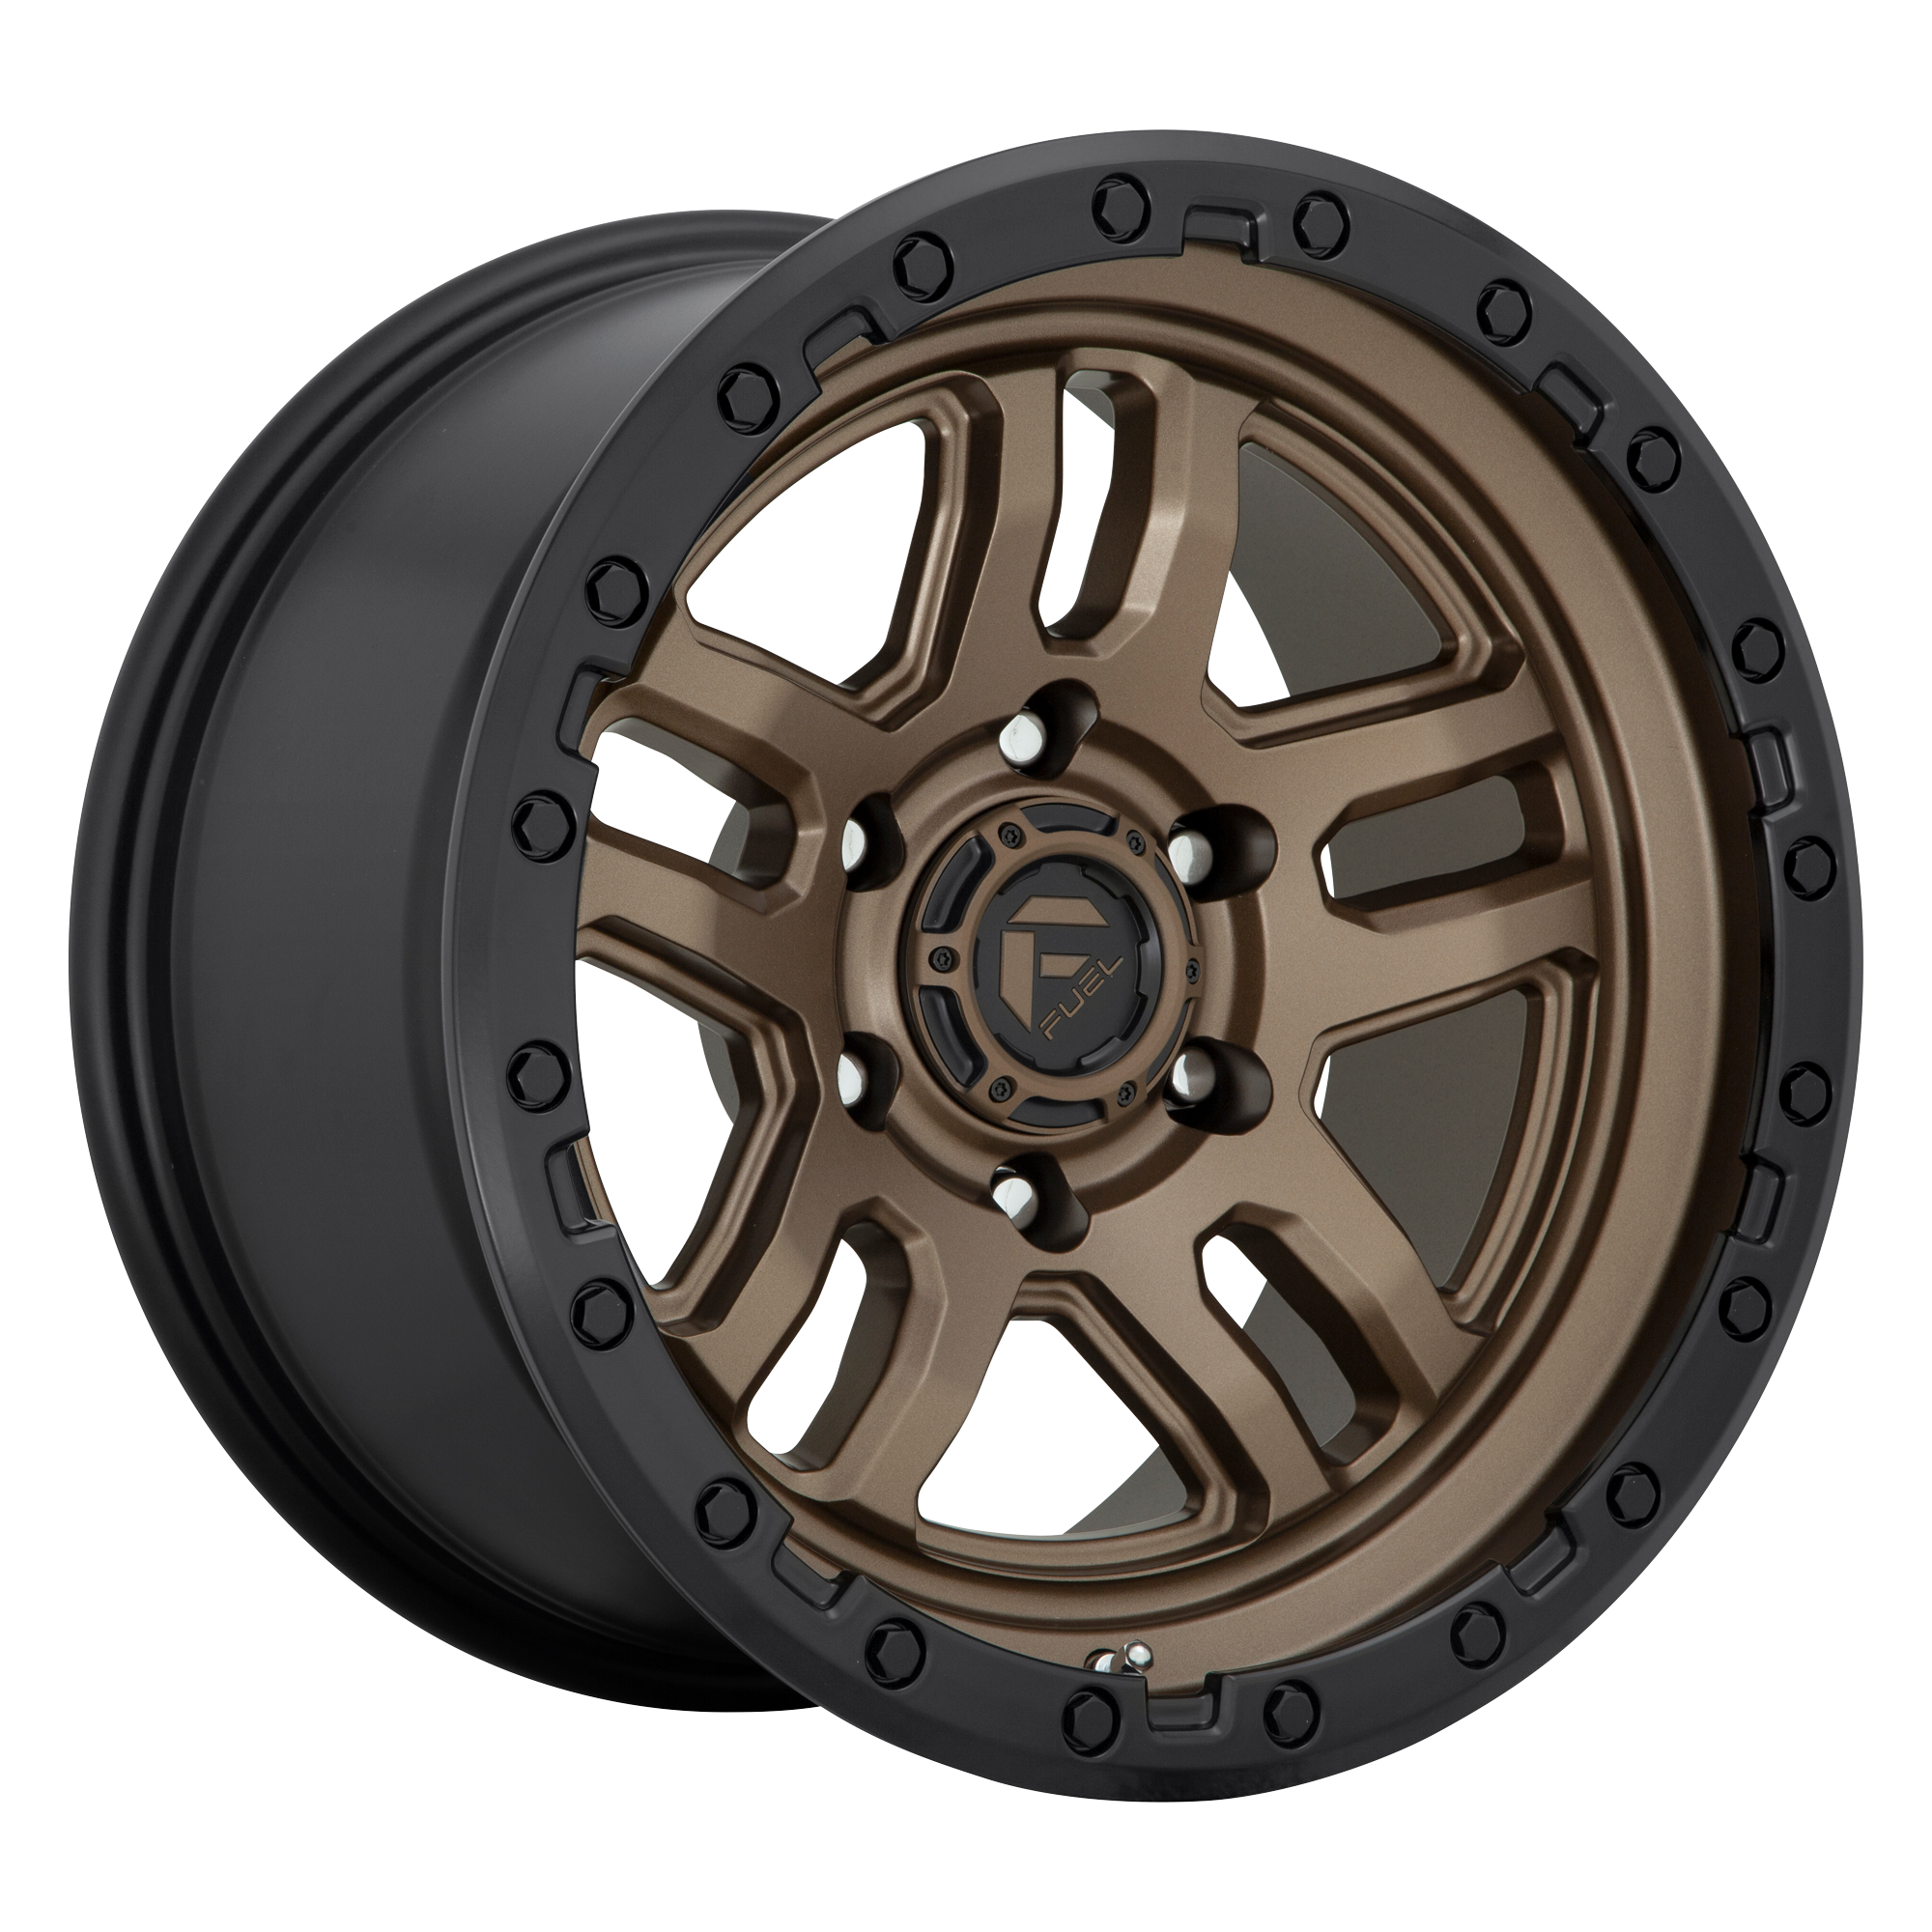 AMMO 17x9 6x135.00 MATTE BRONZE BLACK BEAD RING (1 mm) - Tires and Engine Performance